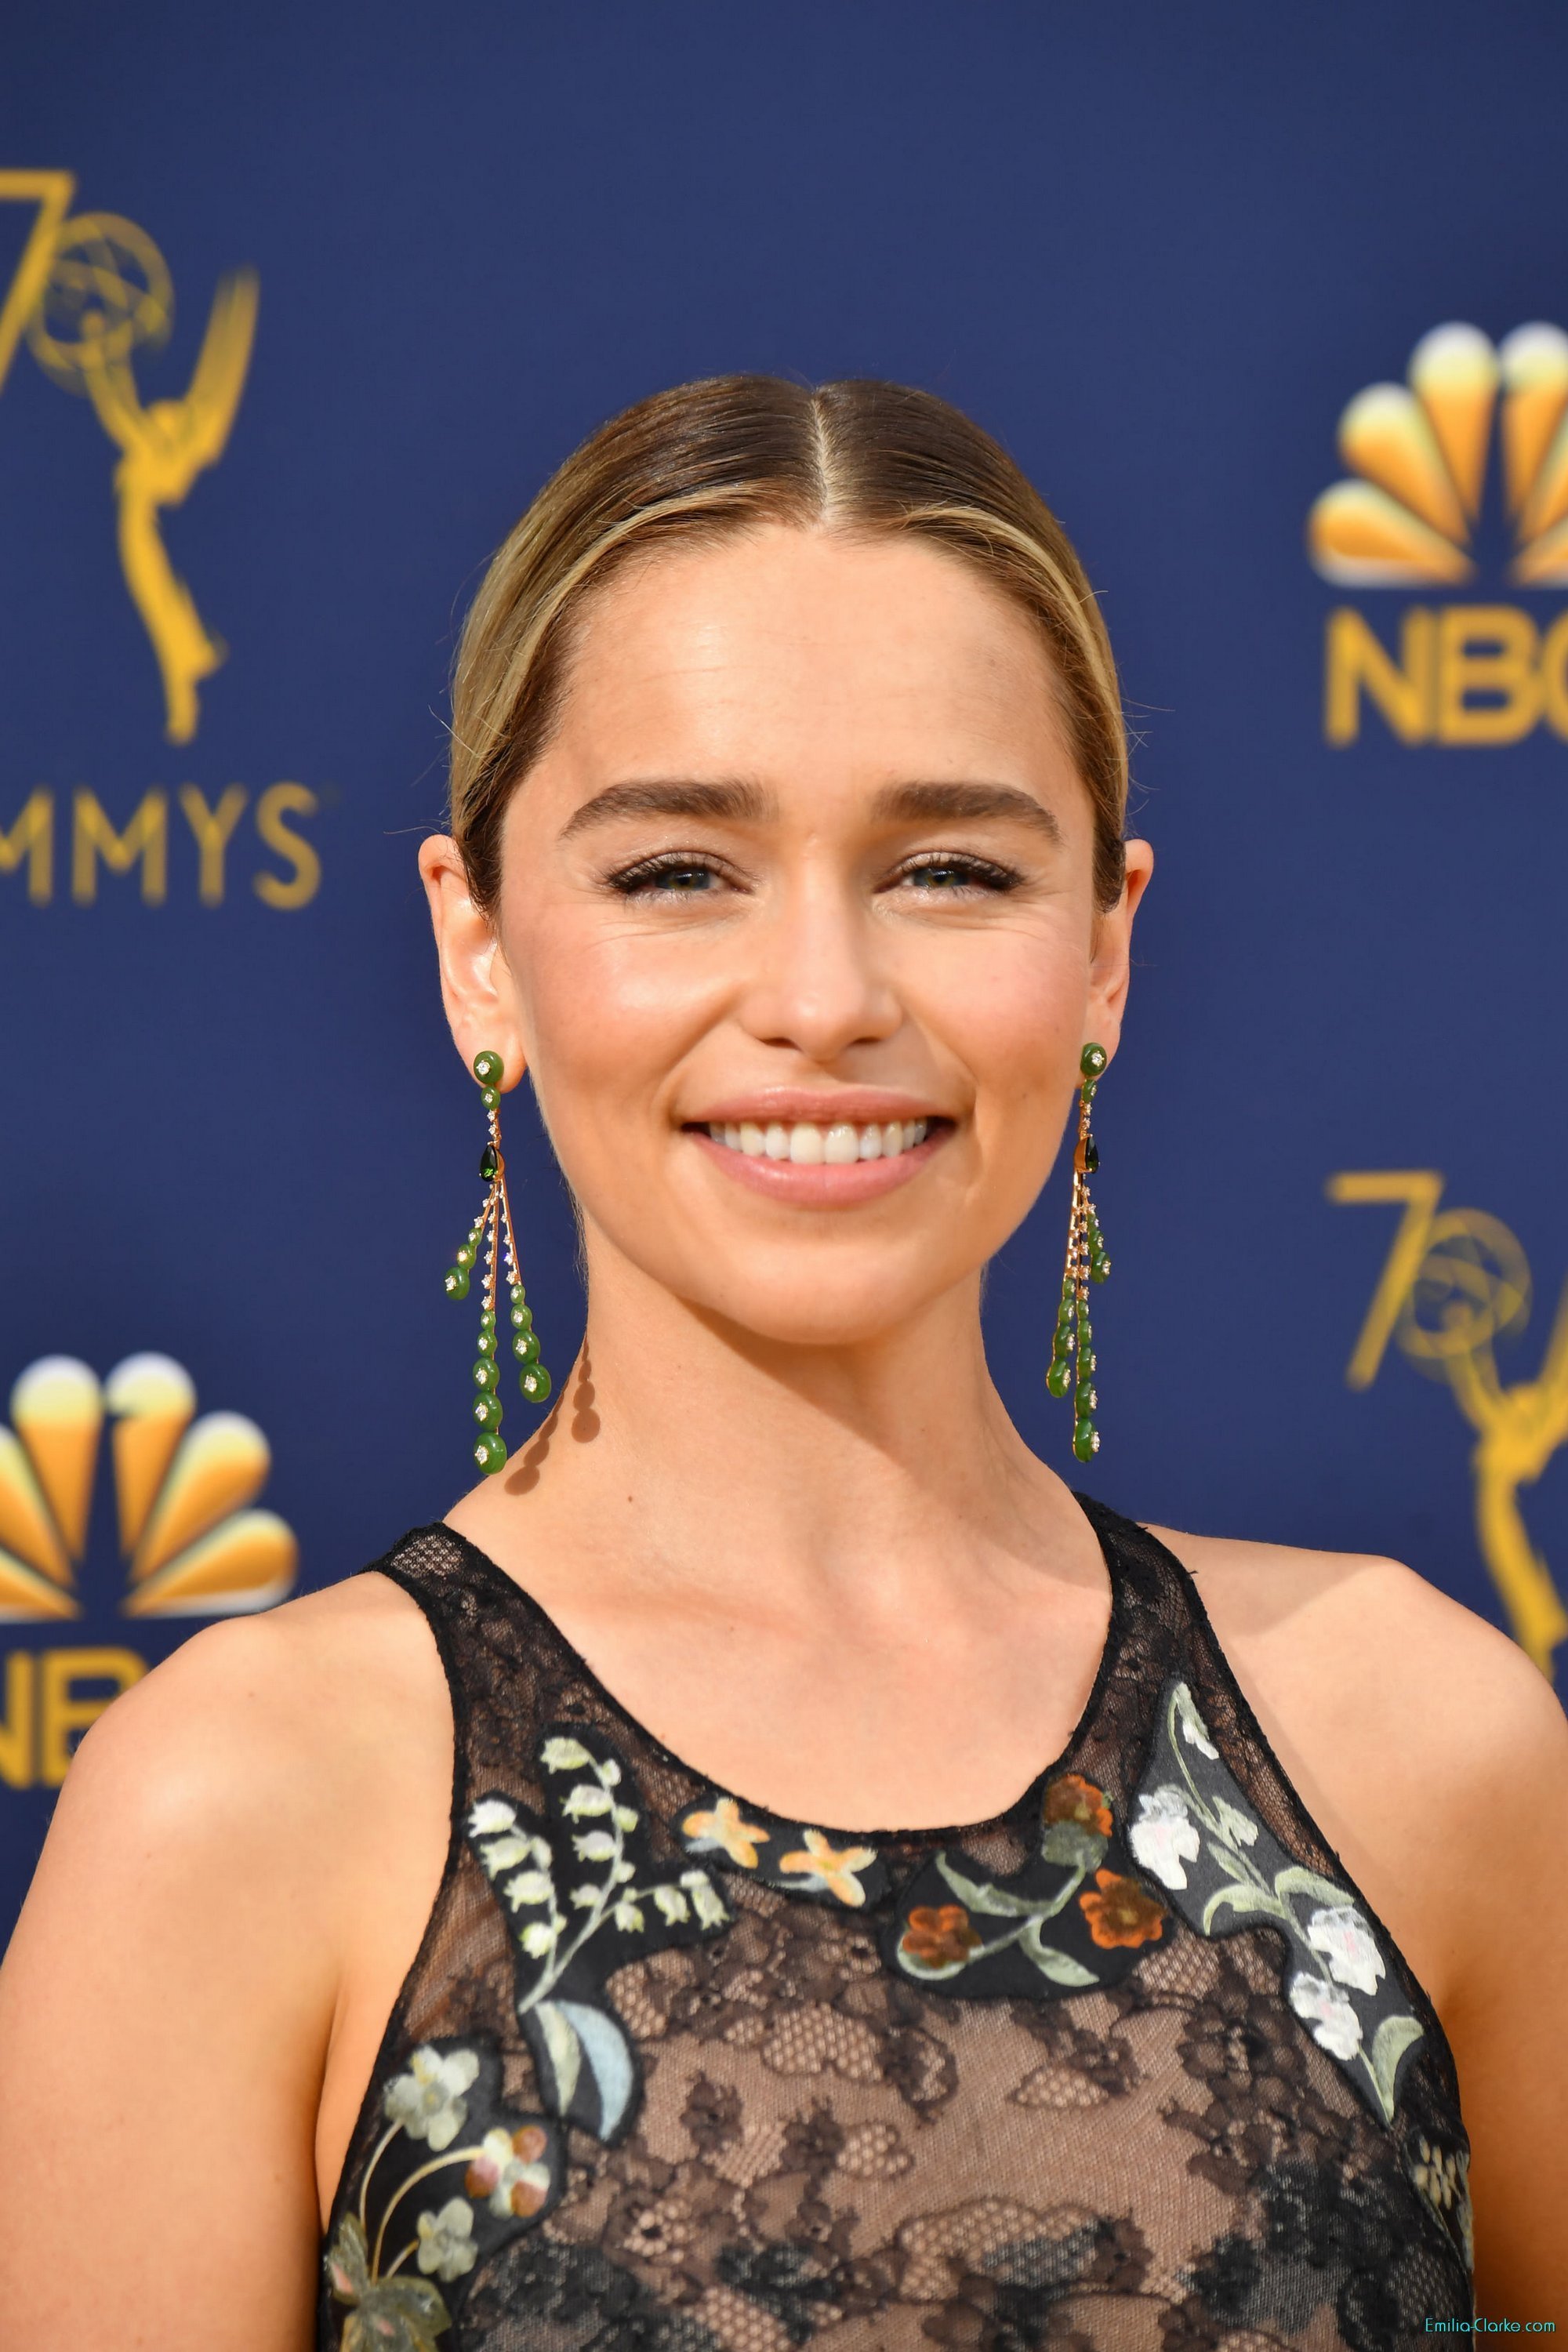 Index of /gallery/albums/Appearances/2018/20180917-Emmys-RedCarpet 